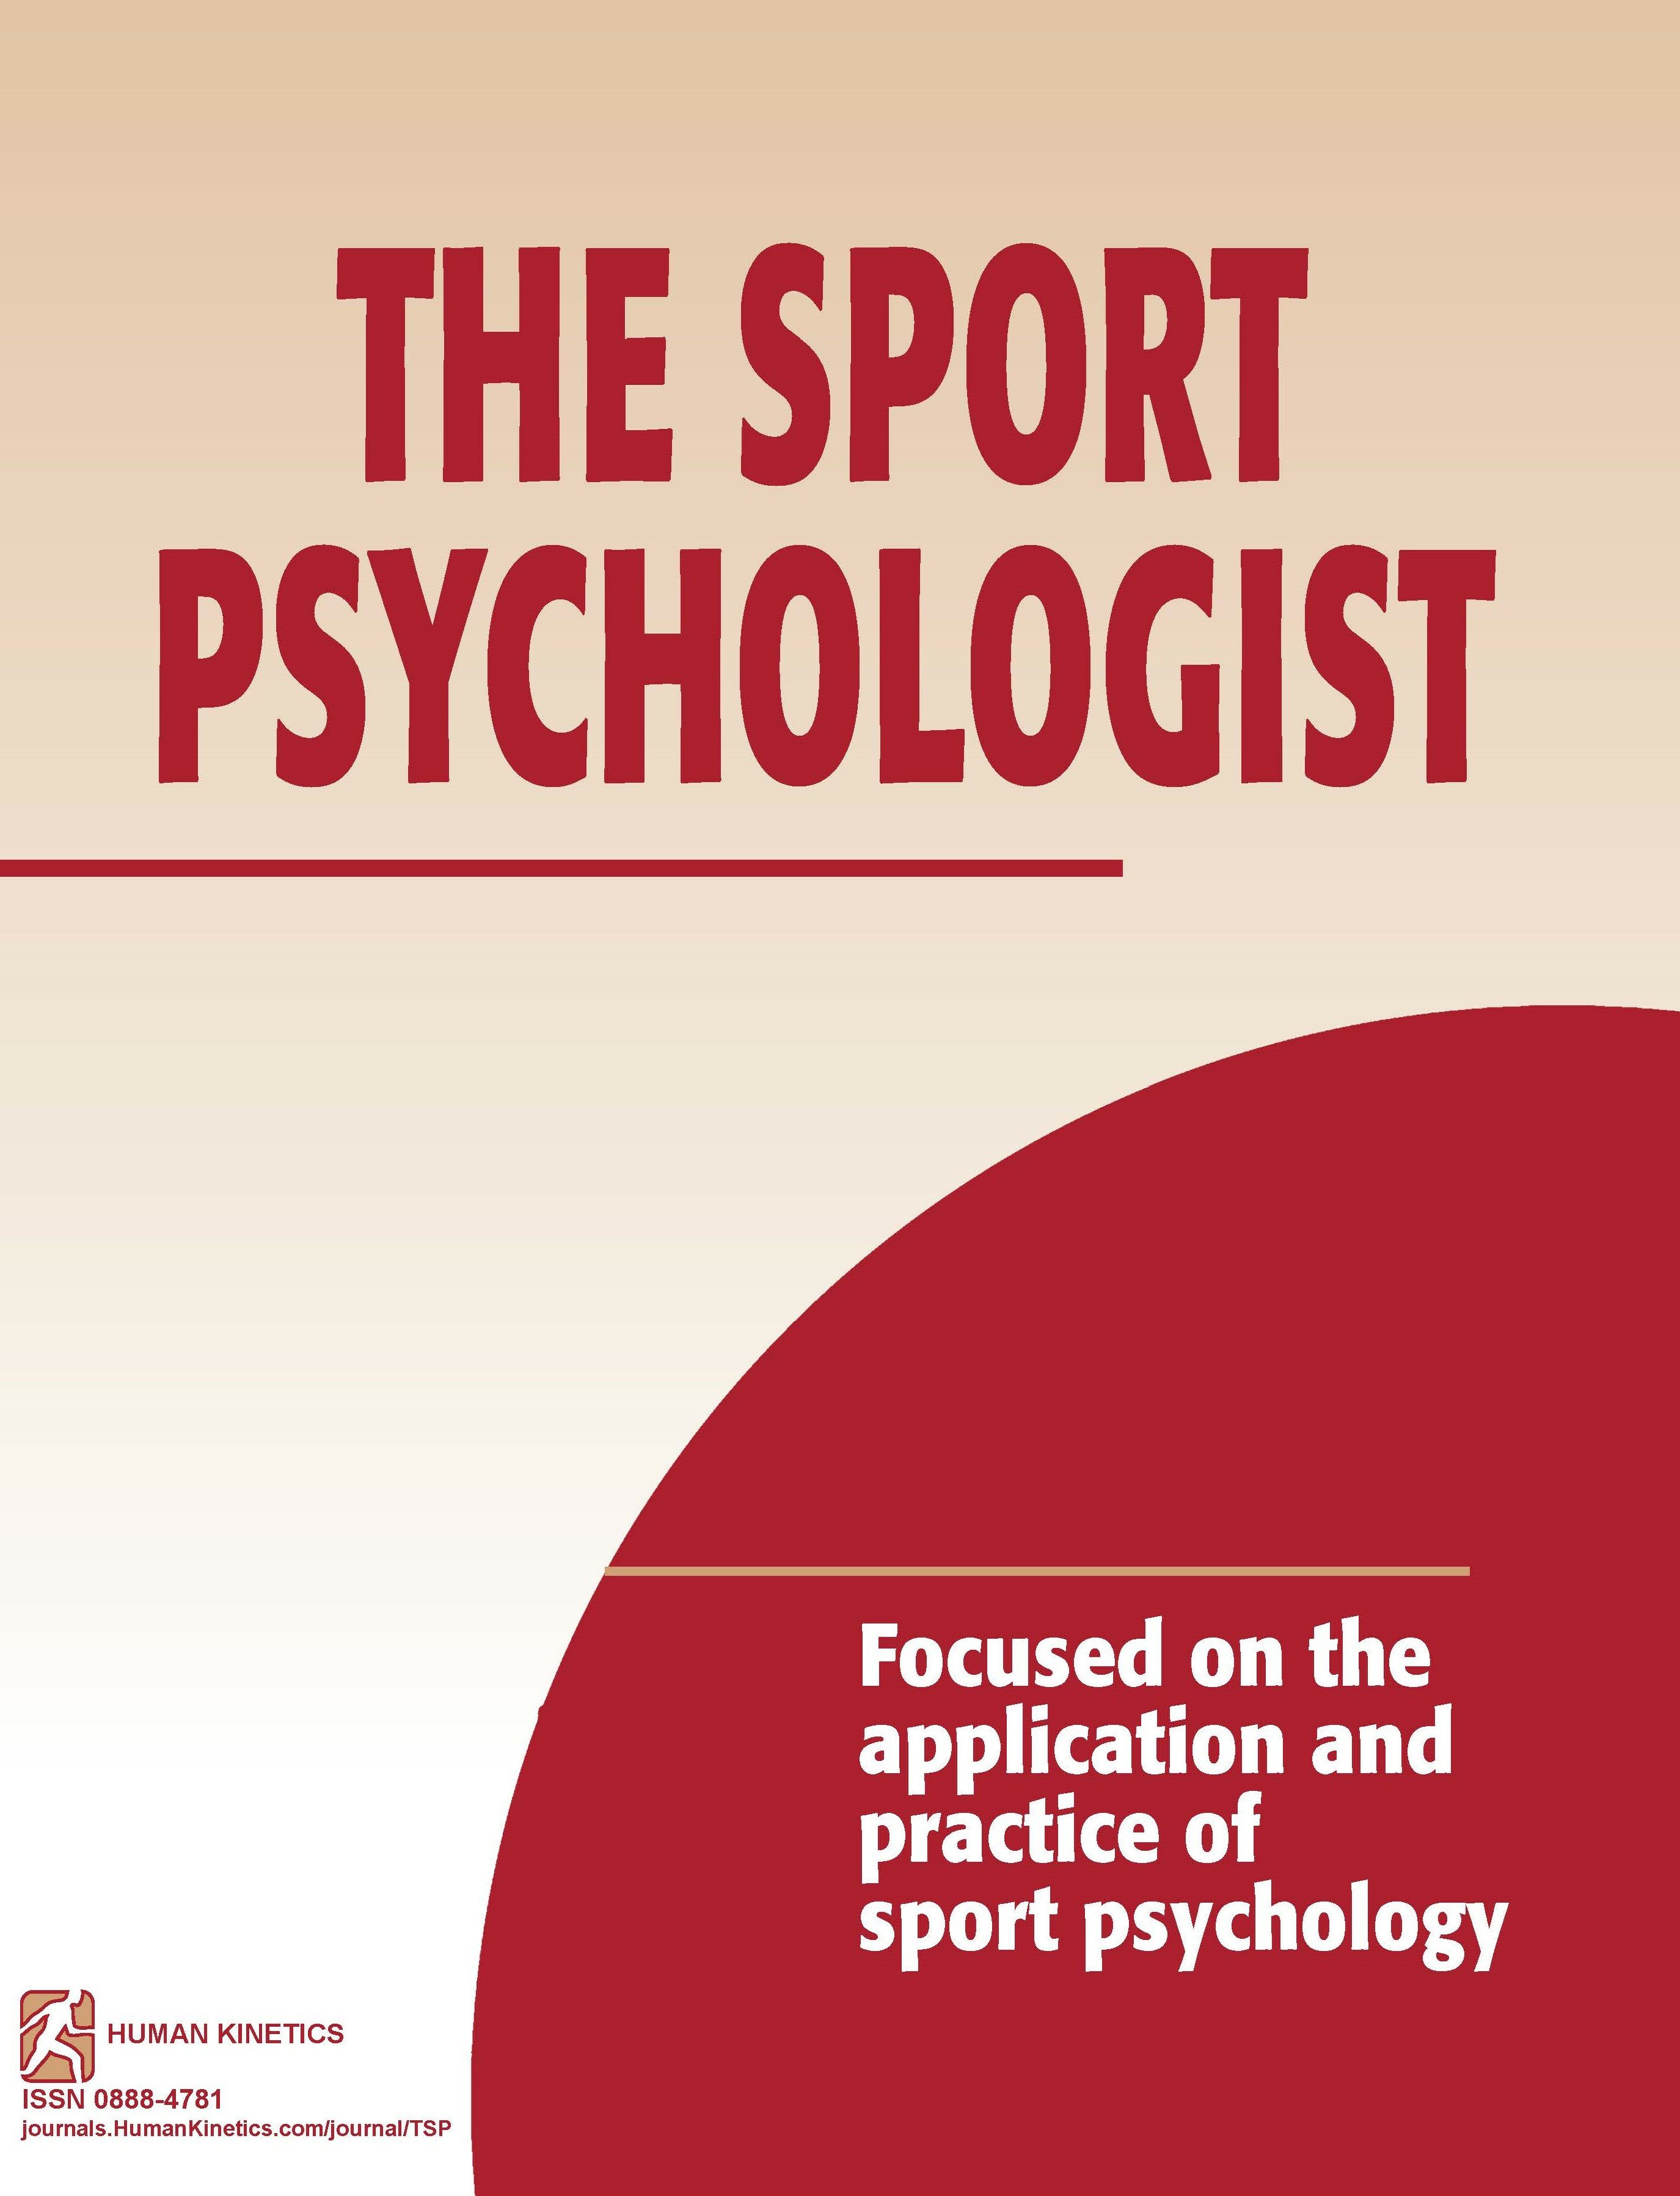 Exploring the Relationship Between Athletes’ Perceptions of Their Team Motivational Climate and Their Sport Shame